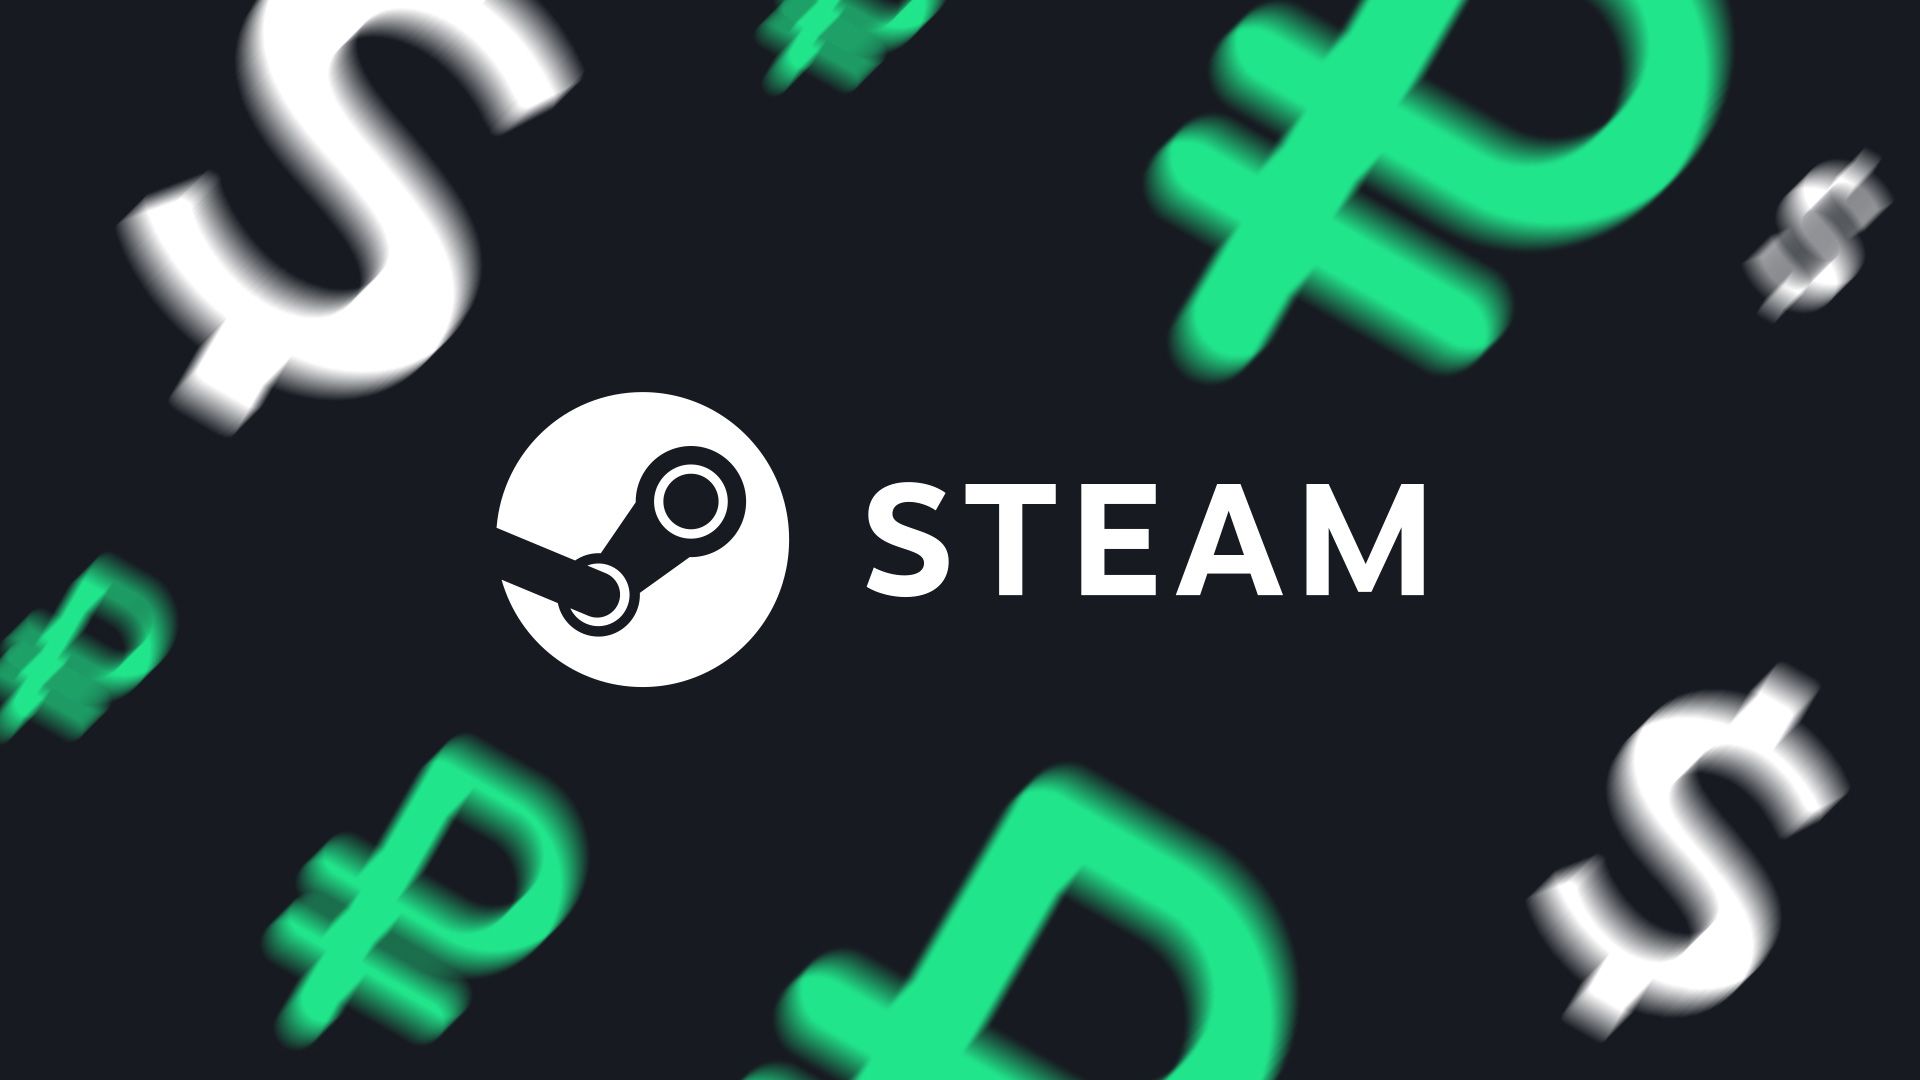 ⭐️ INSTANT ⭐️ STEAM REPLENISHMENT +STEAM KEY FOR REVIEW